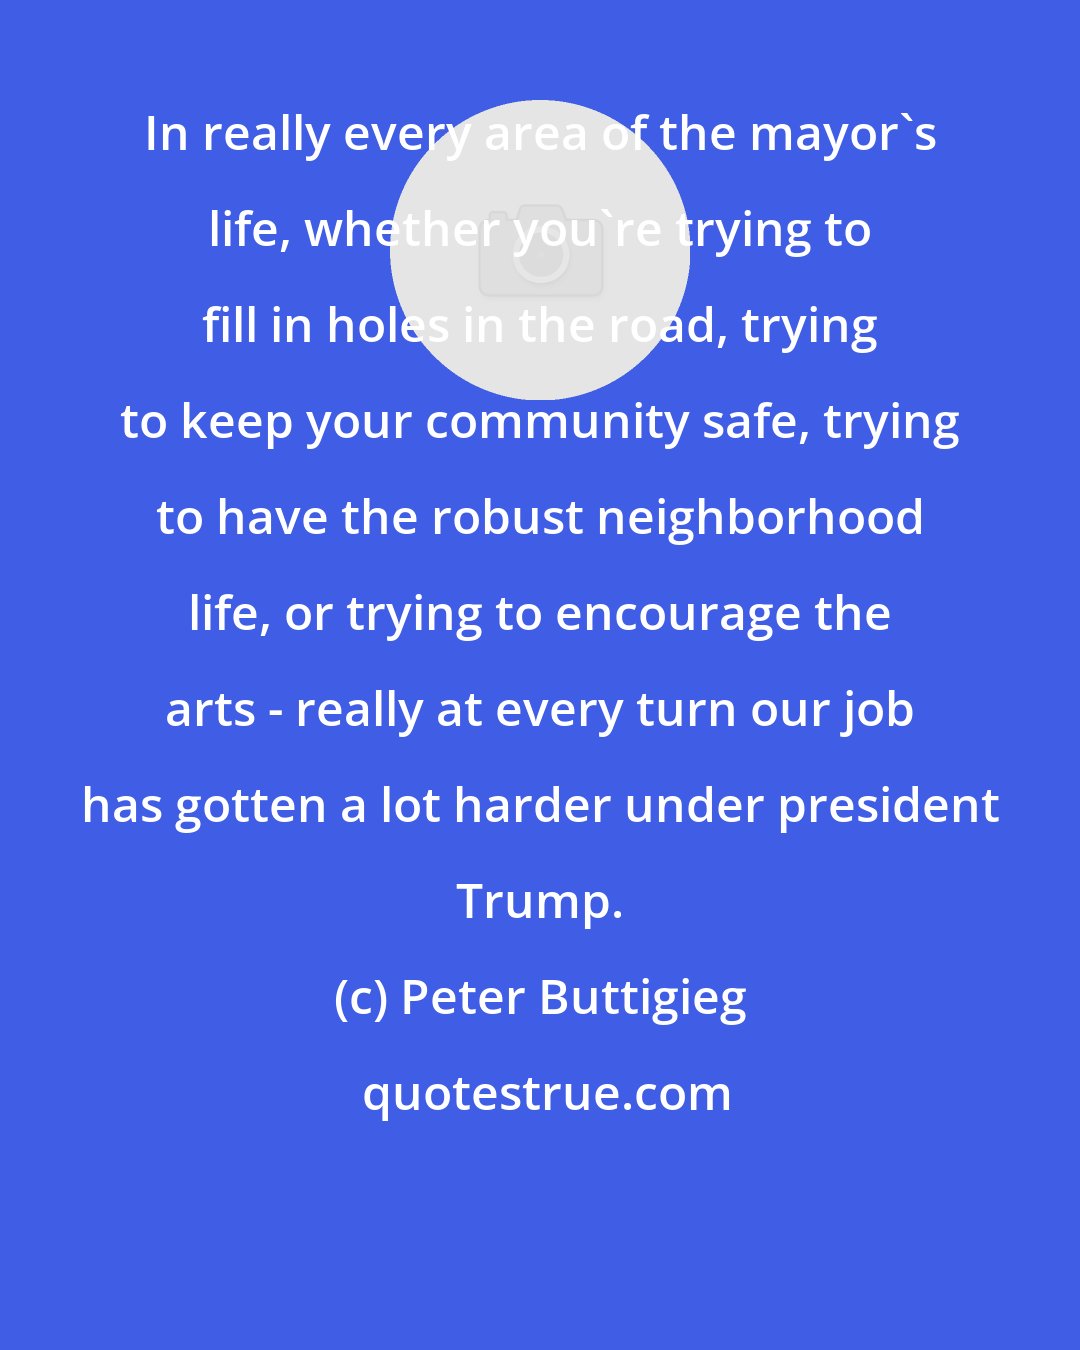 Peter Buttigieg: In really every area of the mayor's life, whether you're trying to fill in holes in the road, trying to keep your community safe, trying to have the robust neighborhood life, or trying to encourage the arts - really at every turn our job has gotten a lot harder under president Trump.